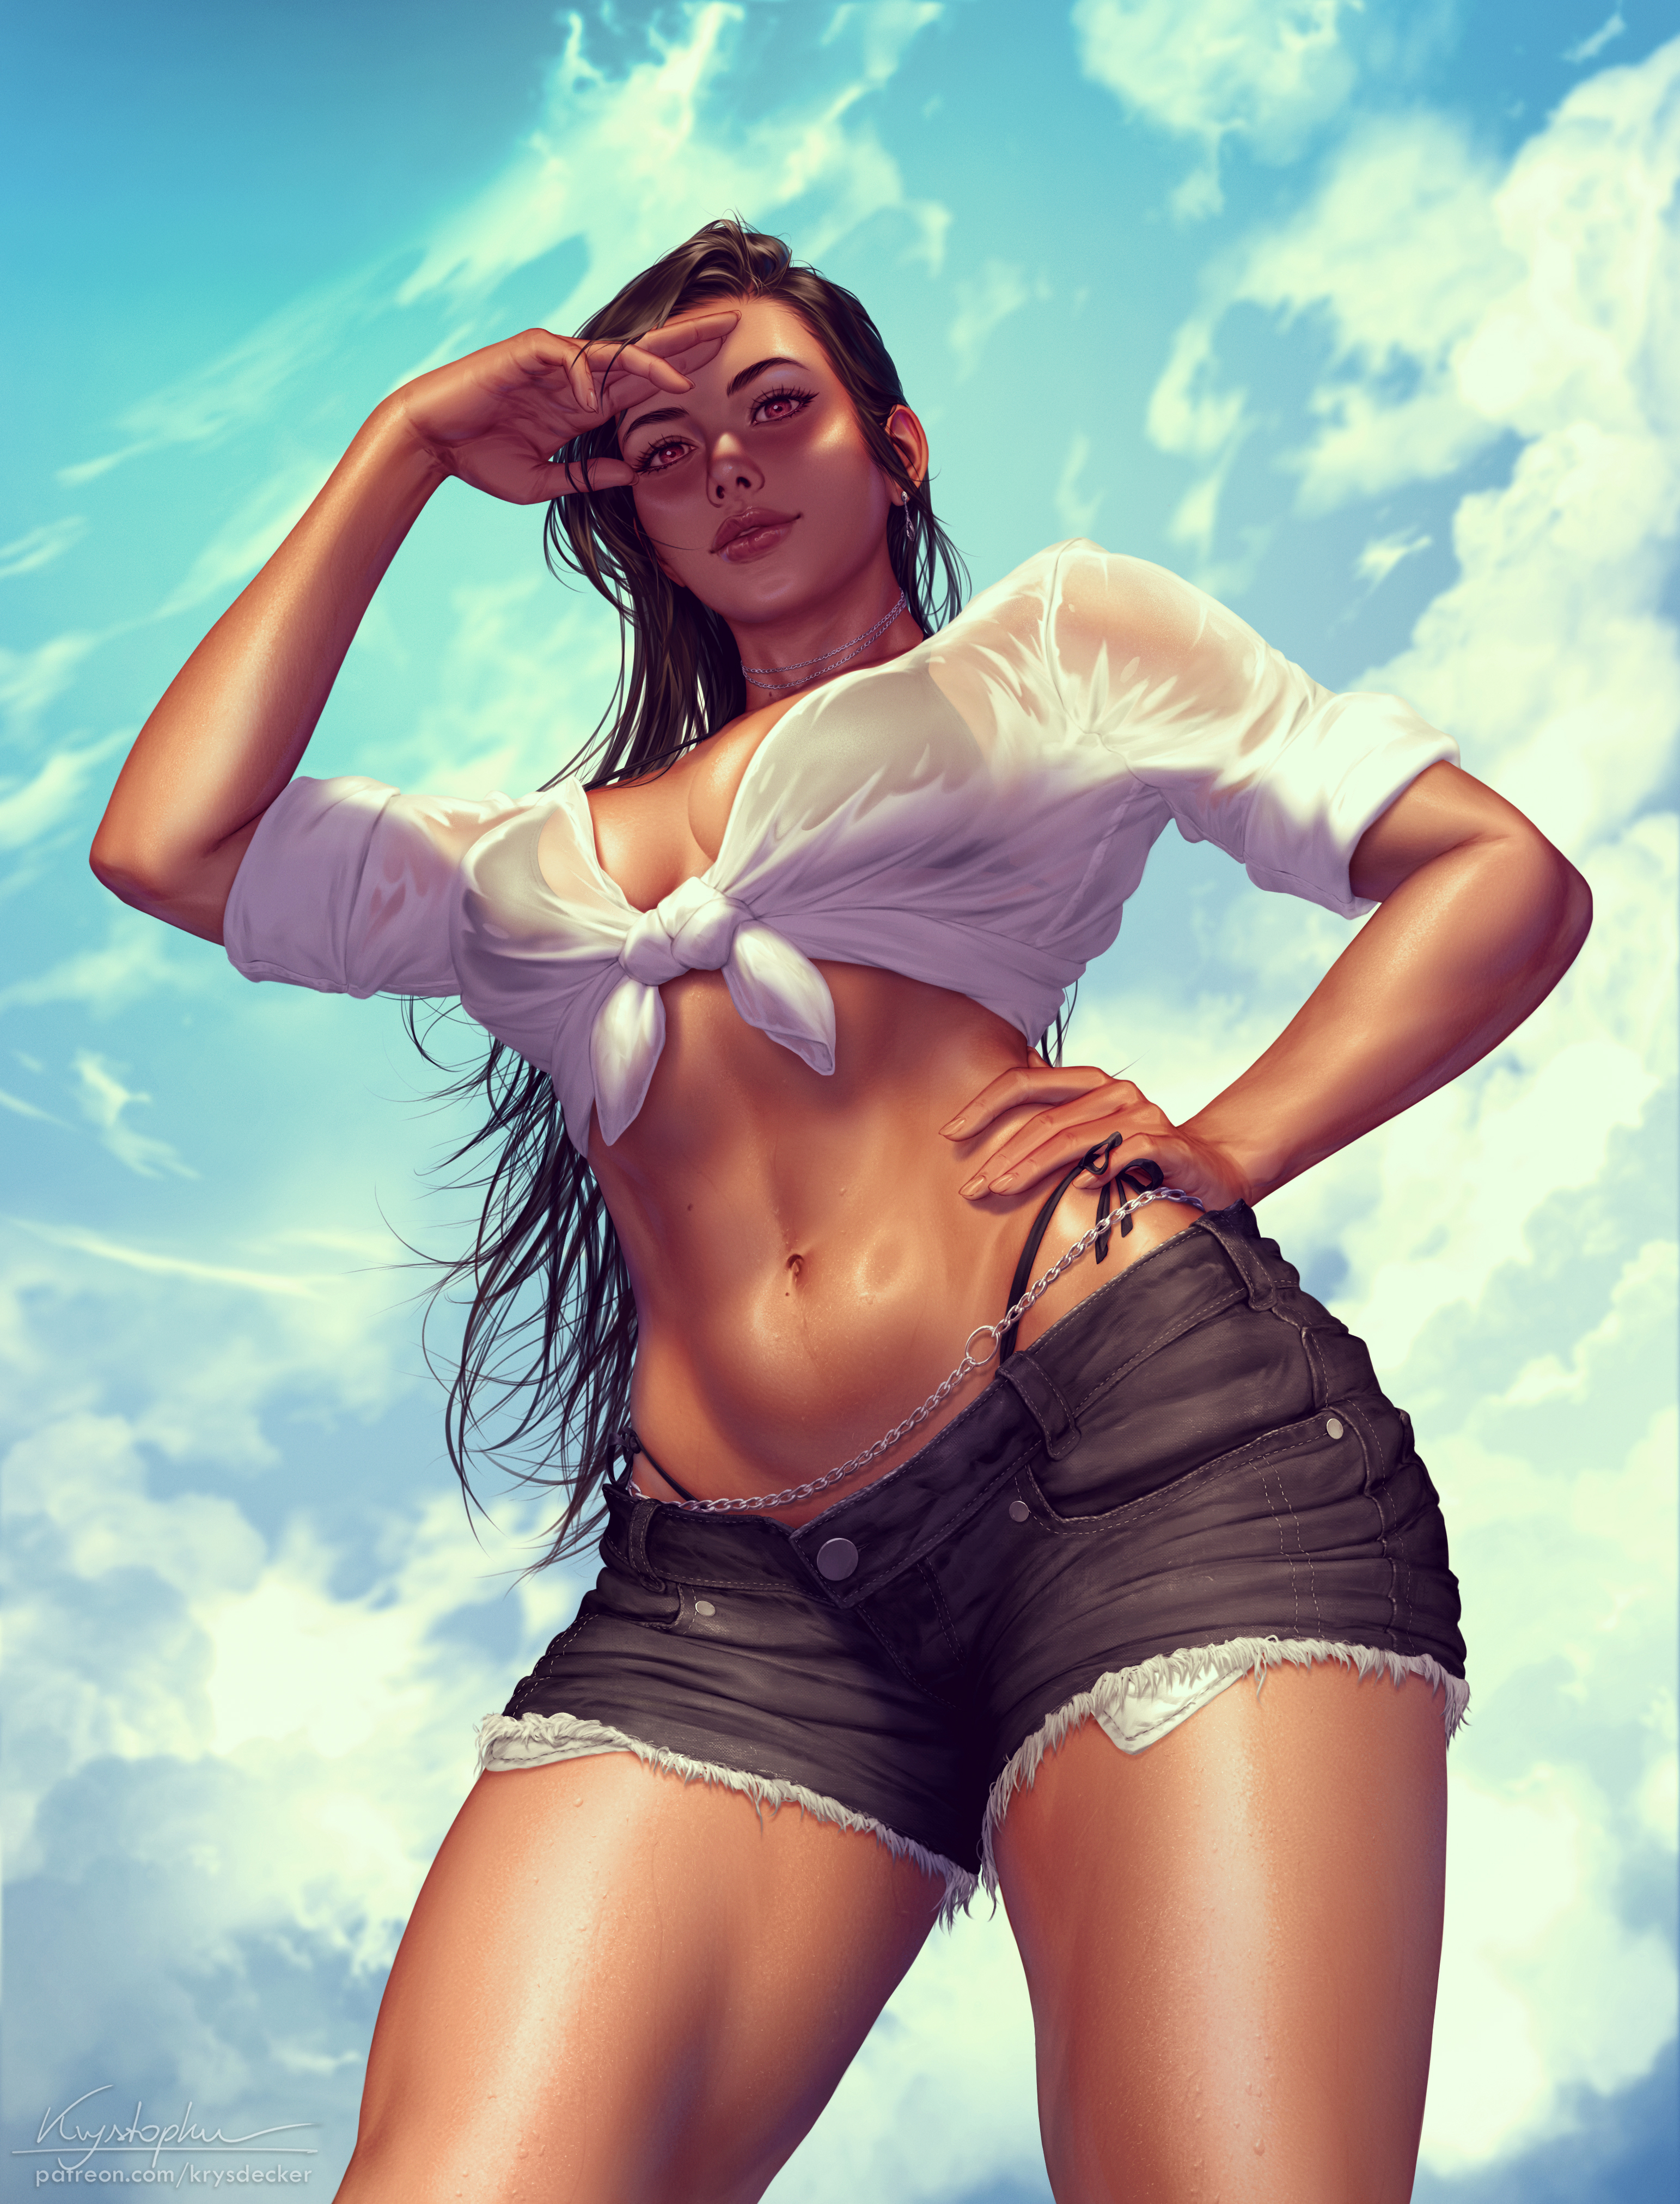 General 3085x4047 Tifa Lockhart Final Fantasy video game characters video game girls artwork drawing fan art Krys Decker skimpy clothes video games standing looking at viewer clouds hands on waist long hair parted lips big boobs signature watermarked women outdoors earring choker juicy lips sky tied top jean shorts wet clothing